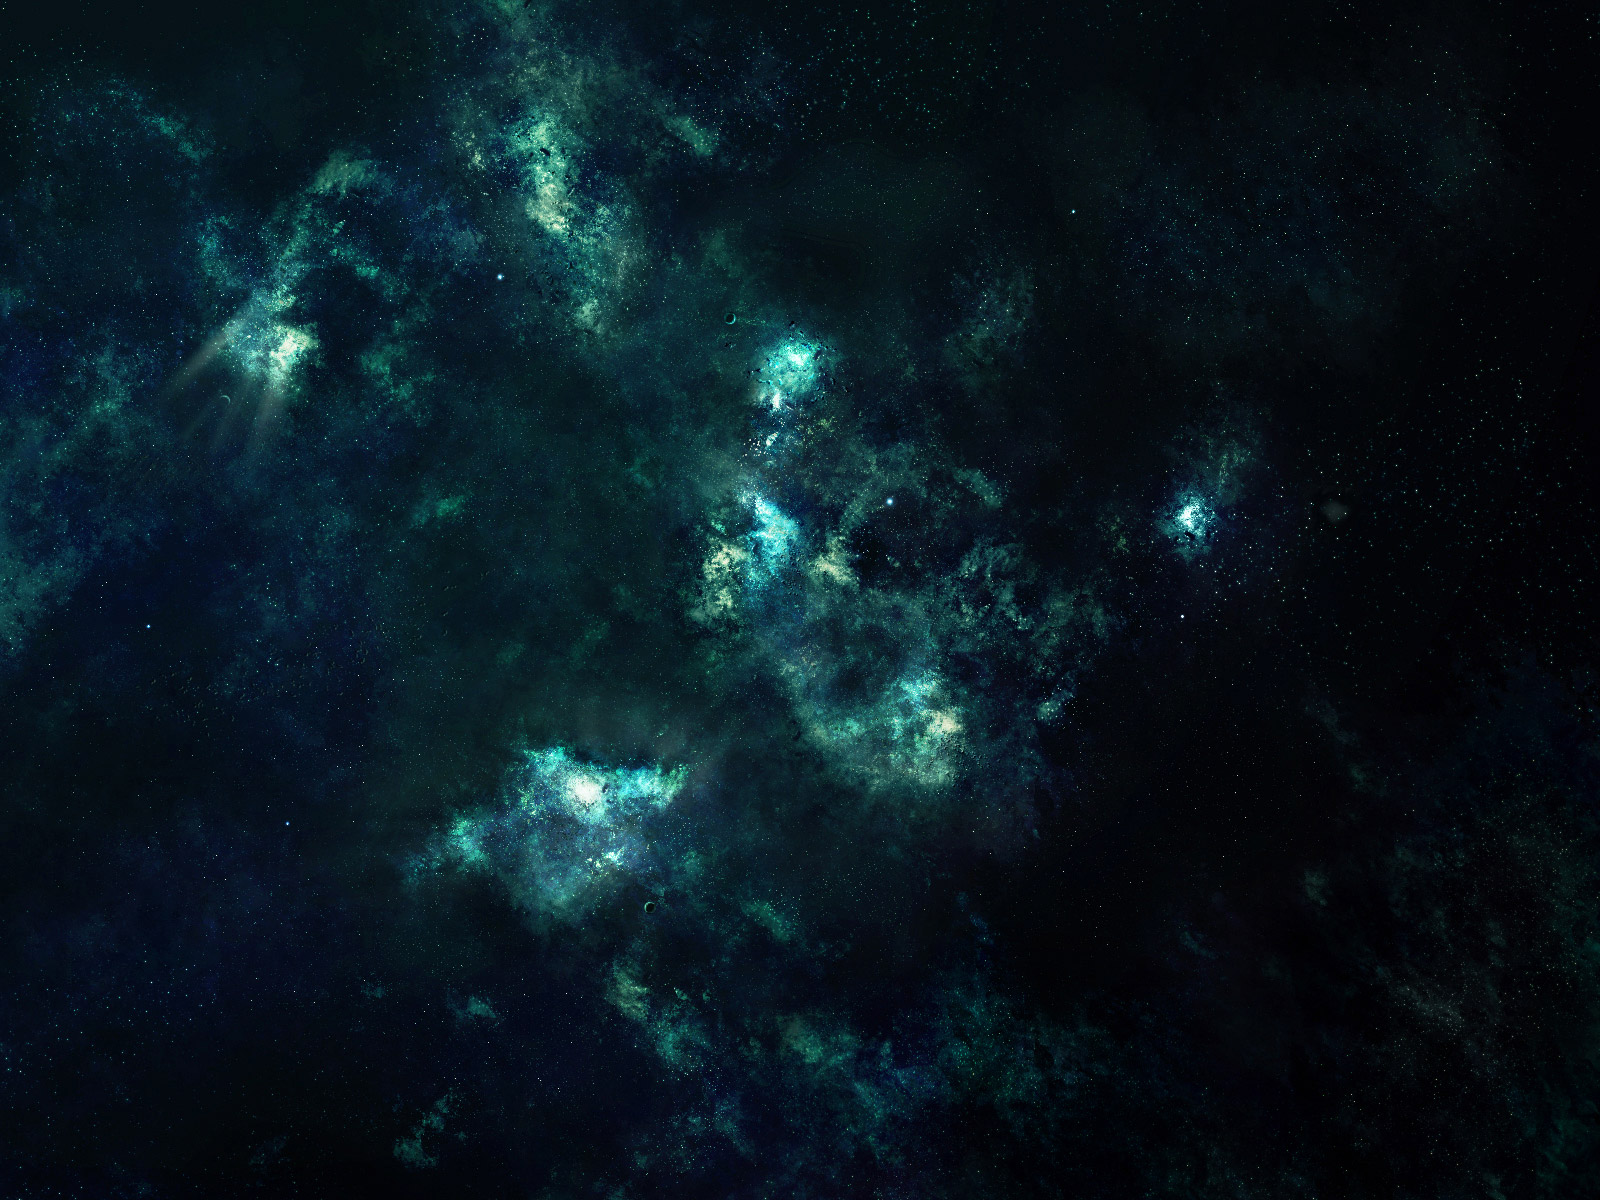 Astronomy and Space Wallpaper are Very Beautiful My image